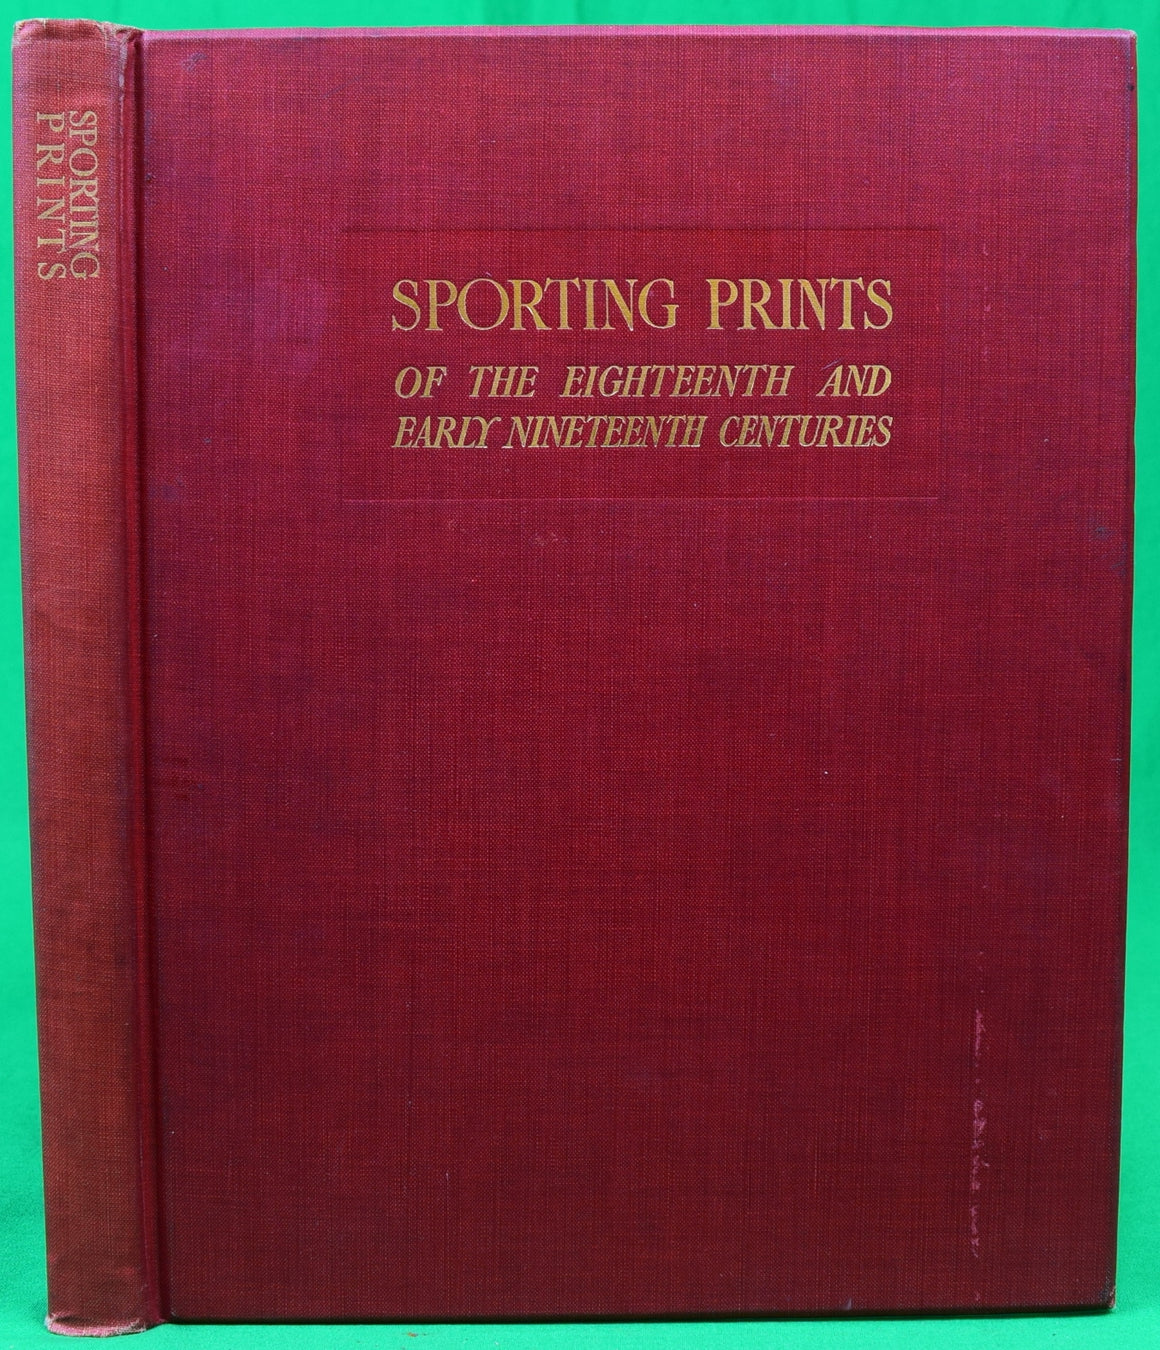 "Sporting Prints Of The Eighteenth And Early Nineteenth Centuries" 1927 ROE, F. Gordon (SOLD)